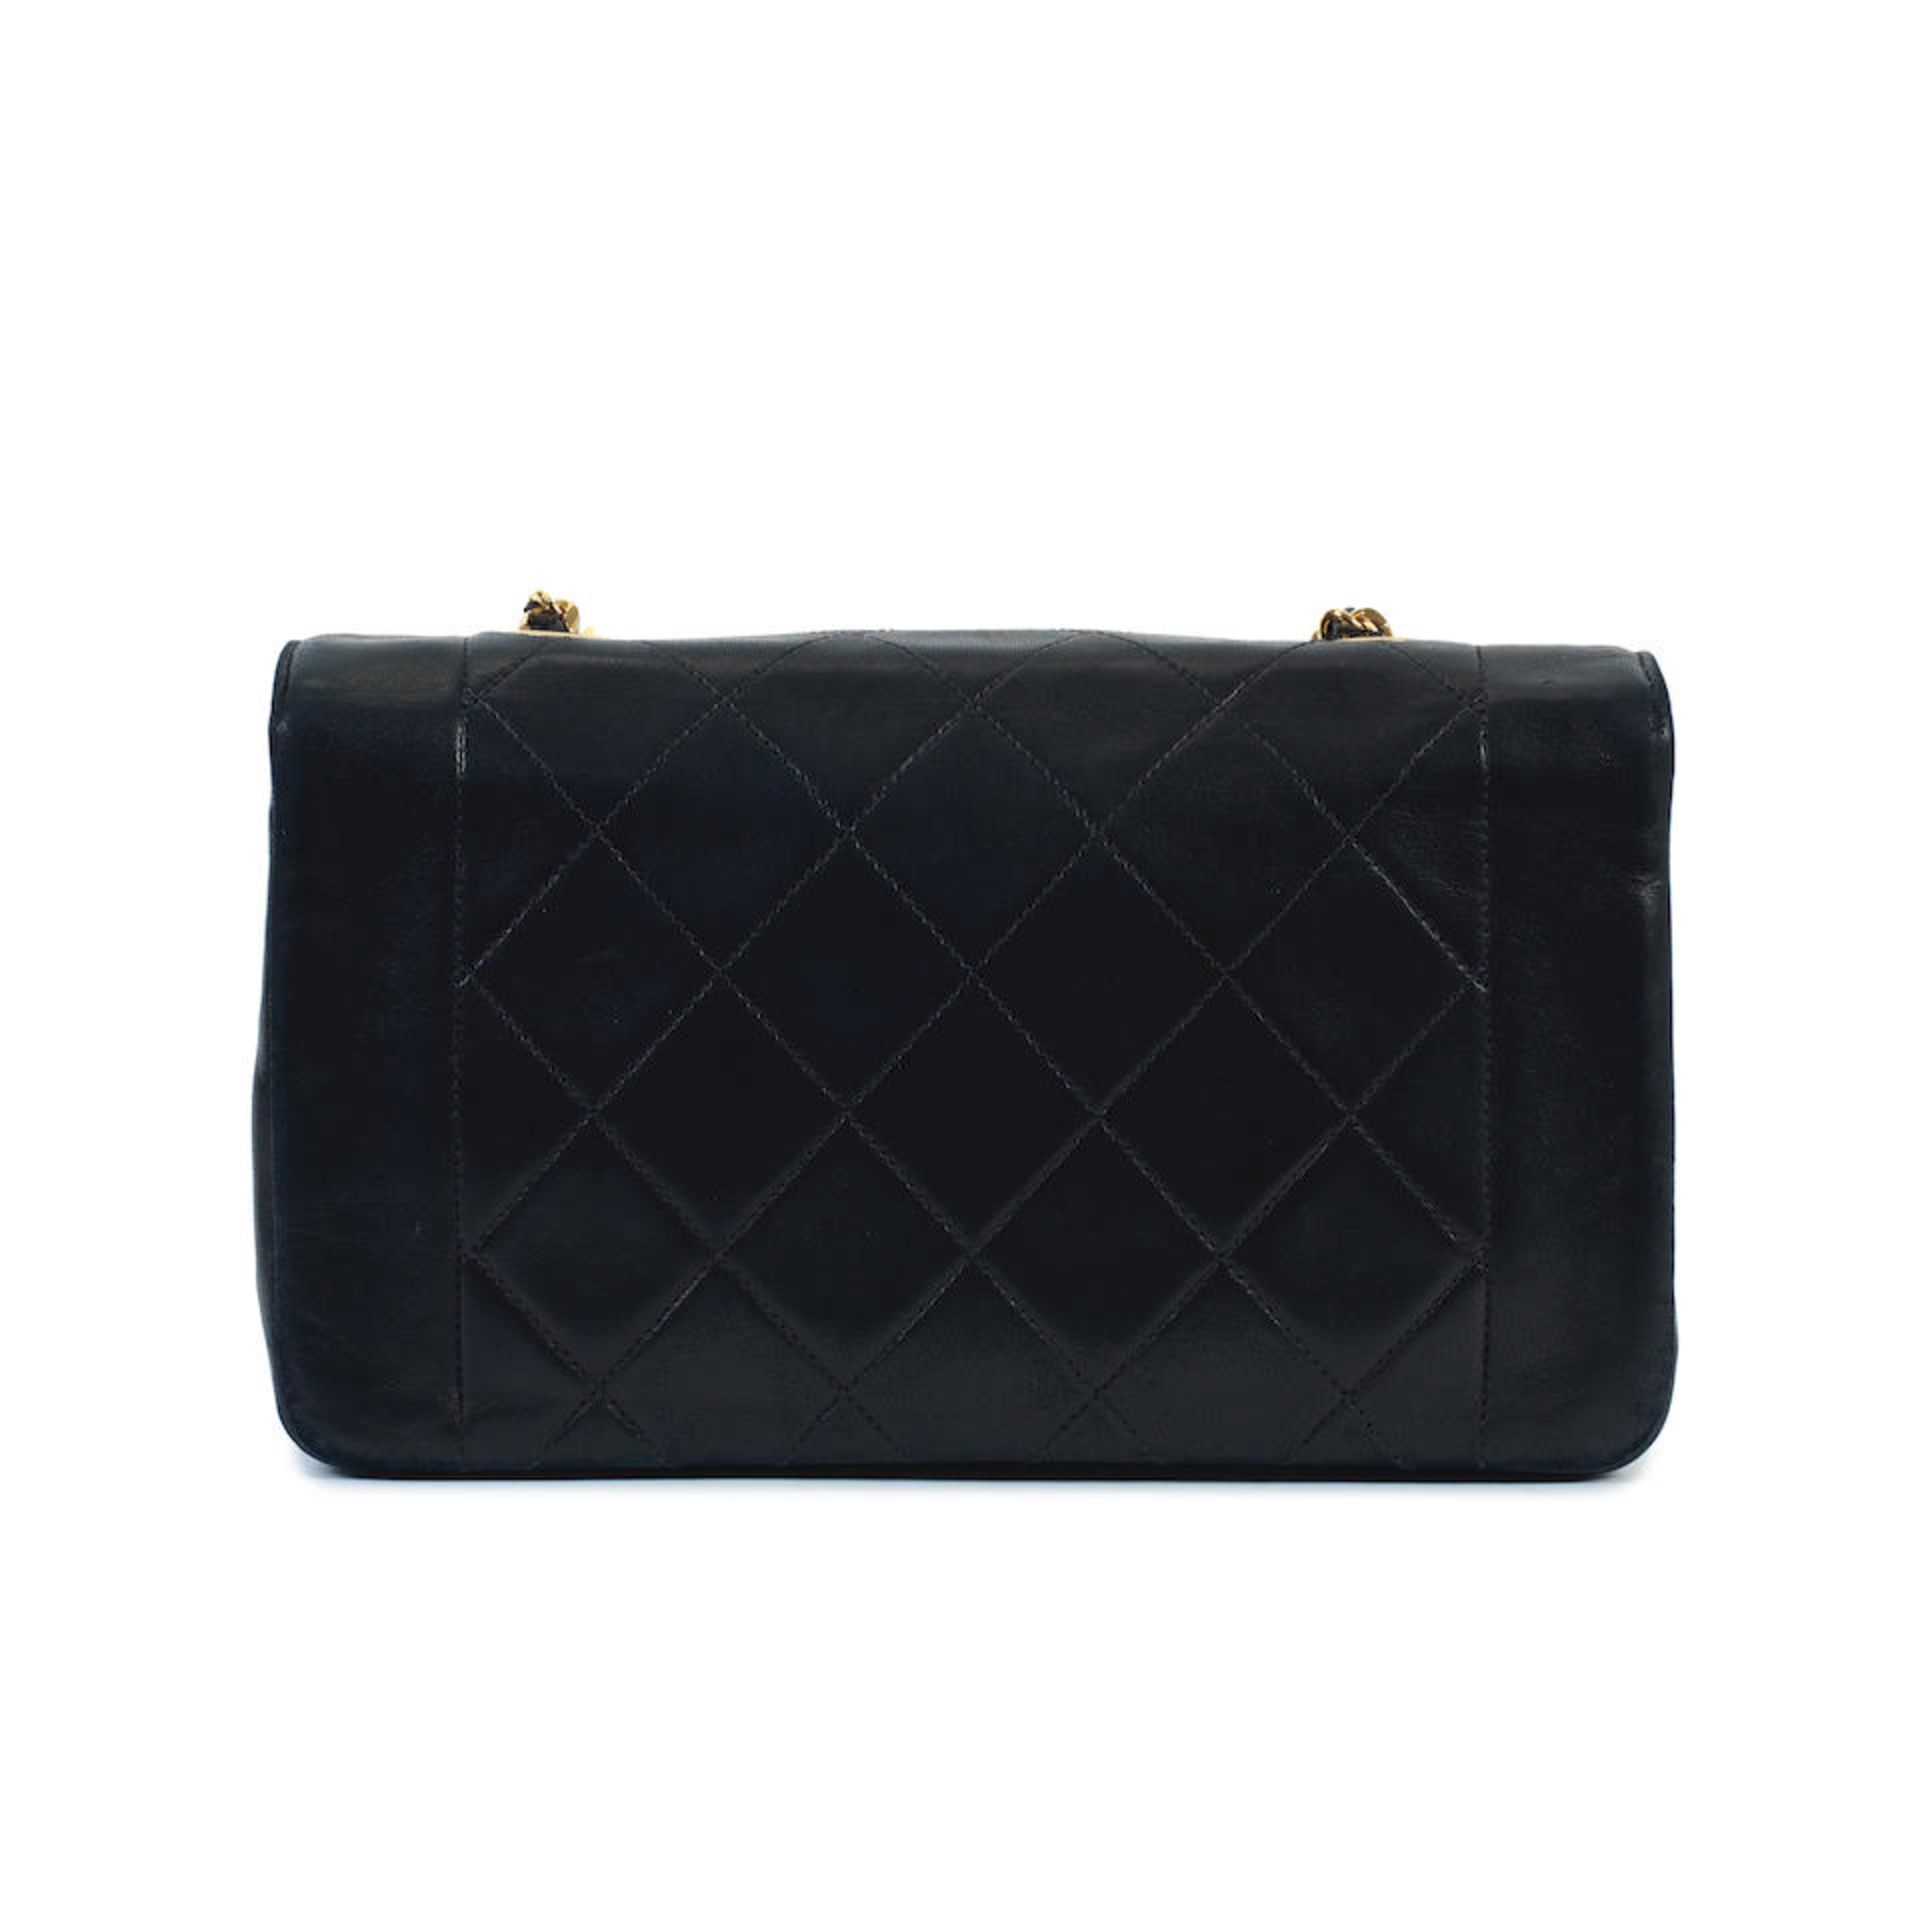 Karl Lagerfeld for Chanel: a Black Quilted Lambskin Small Diana Flap Bag 1991-94 (includes seria... - Bild 2 aus 2